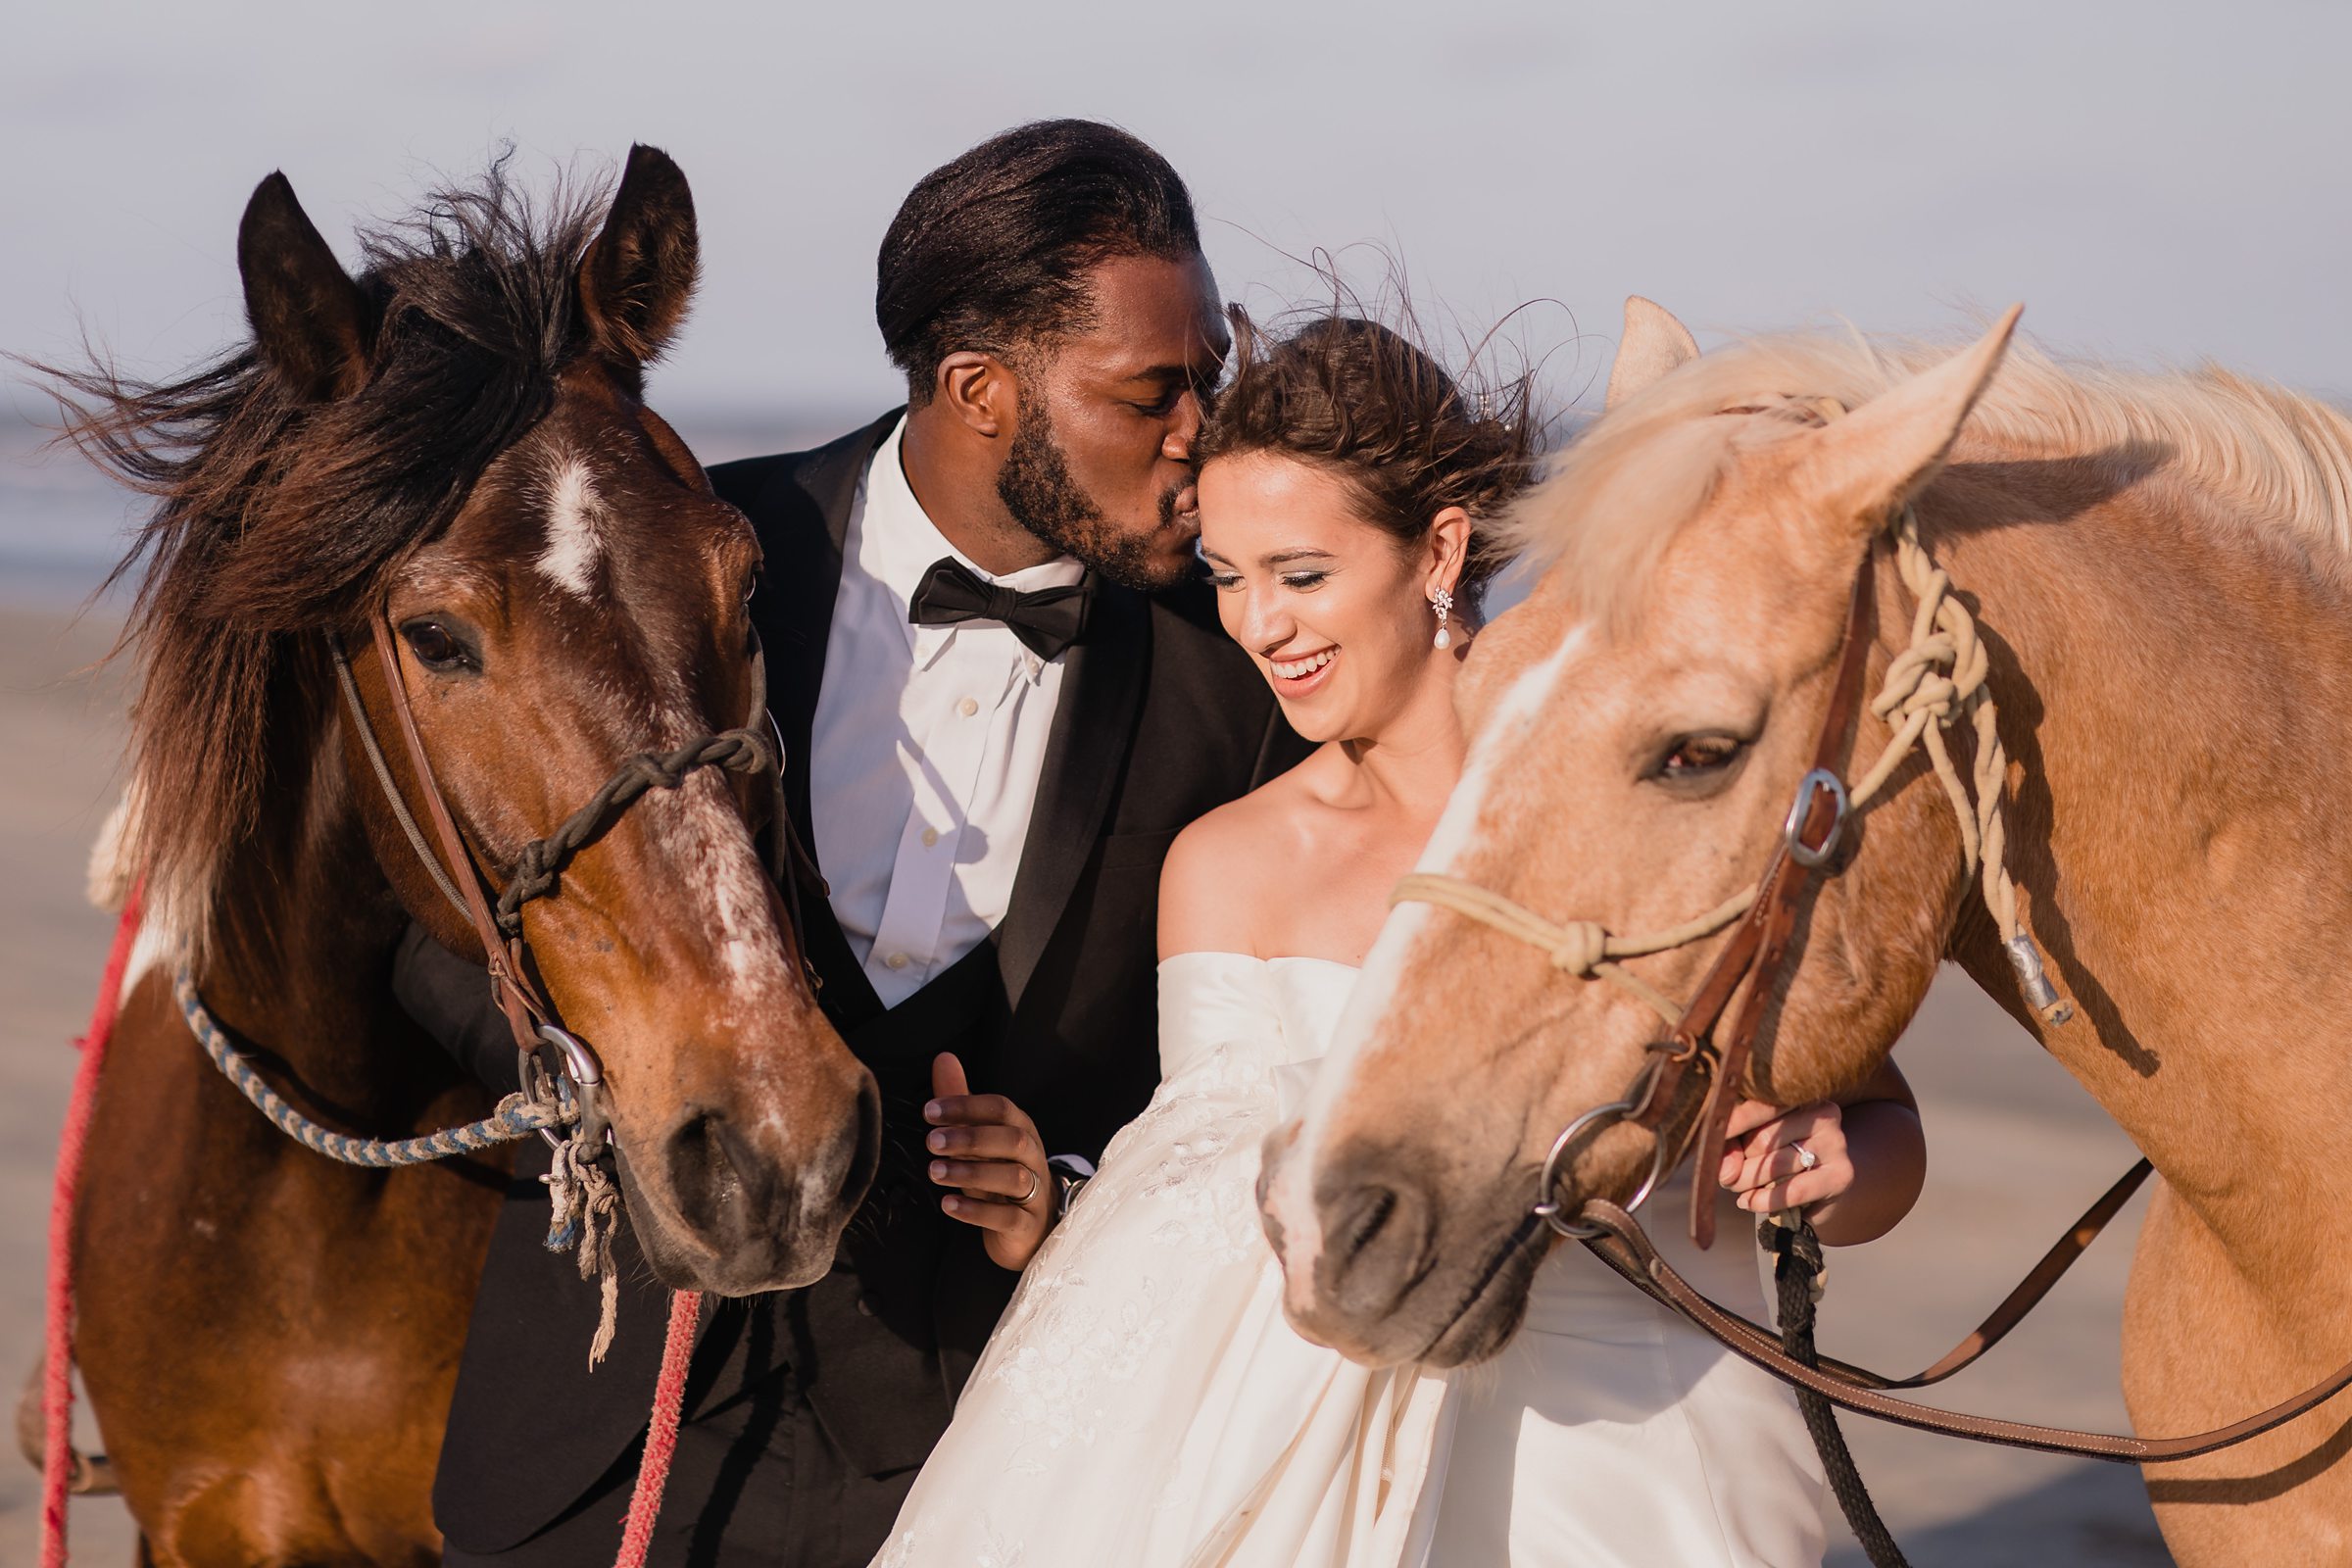 Bride and Groom Embrace with their horses during an elopement in Galveston Beach, Texas